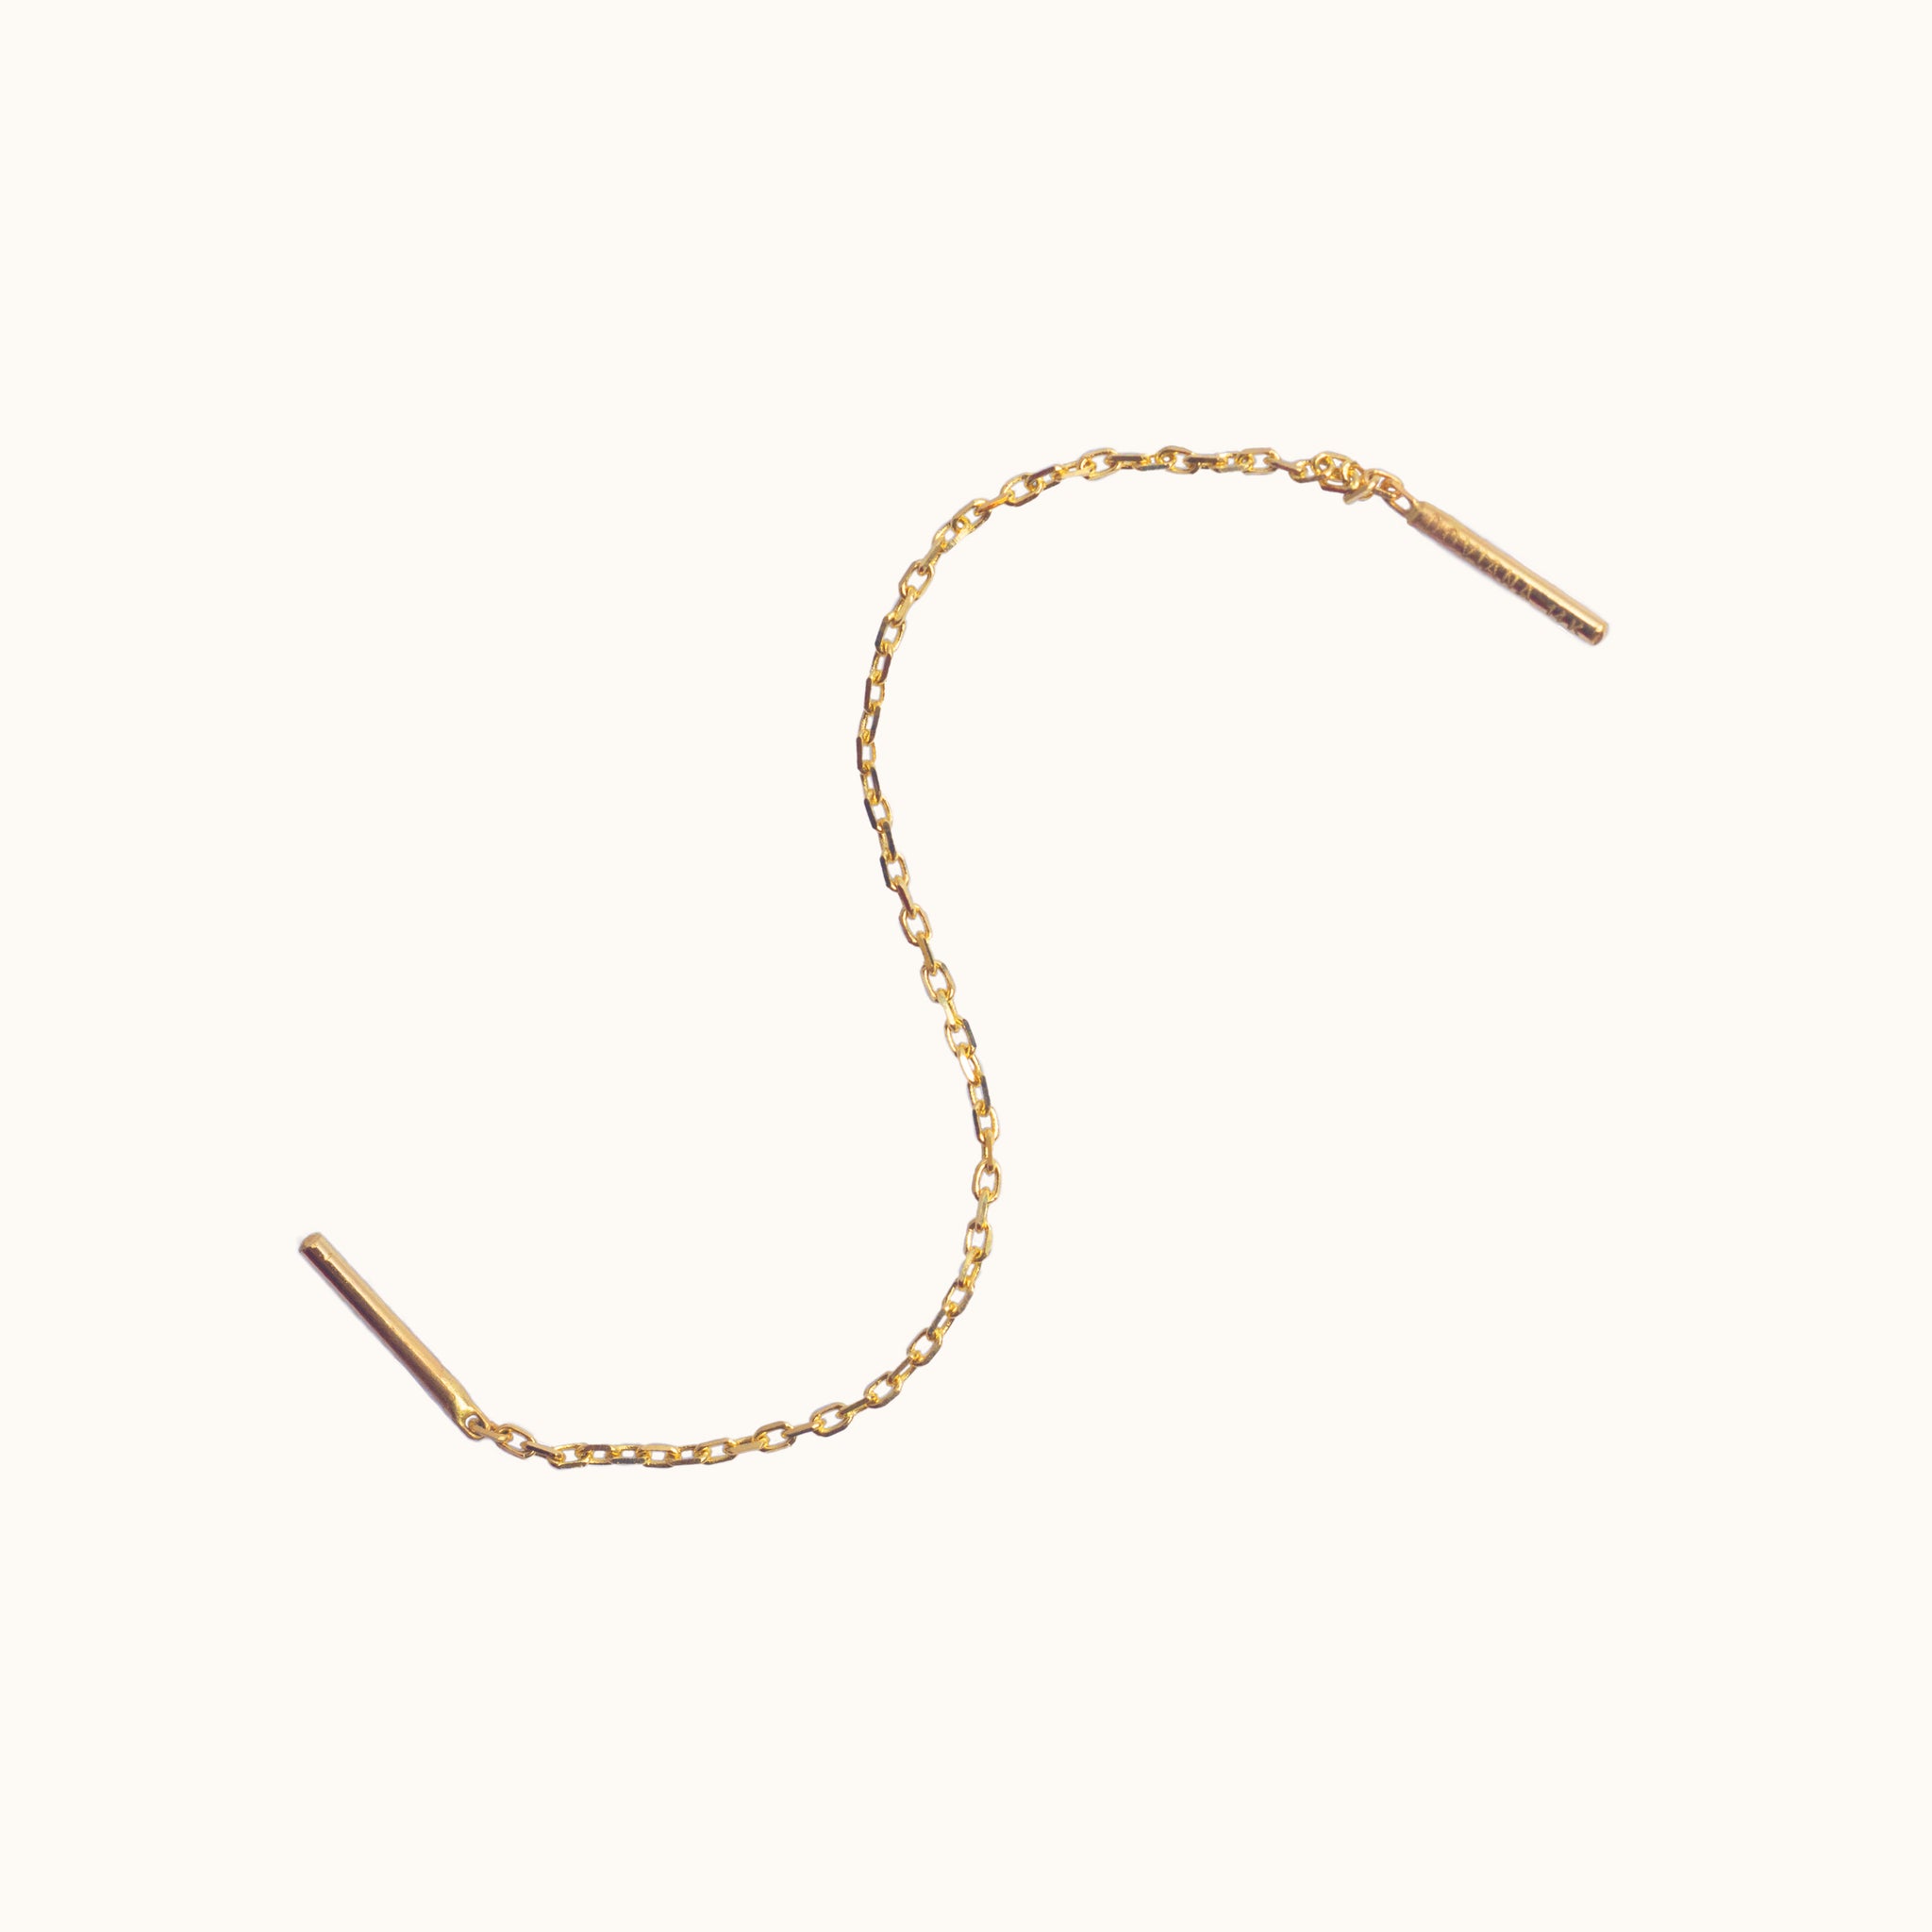 14K Solid Gold Cable Chain Dangle Ear Chain Threader Earring by Doviana